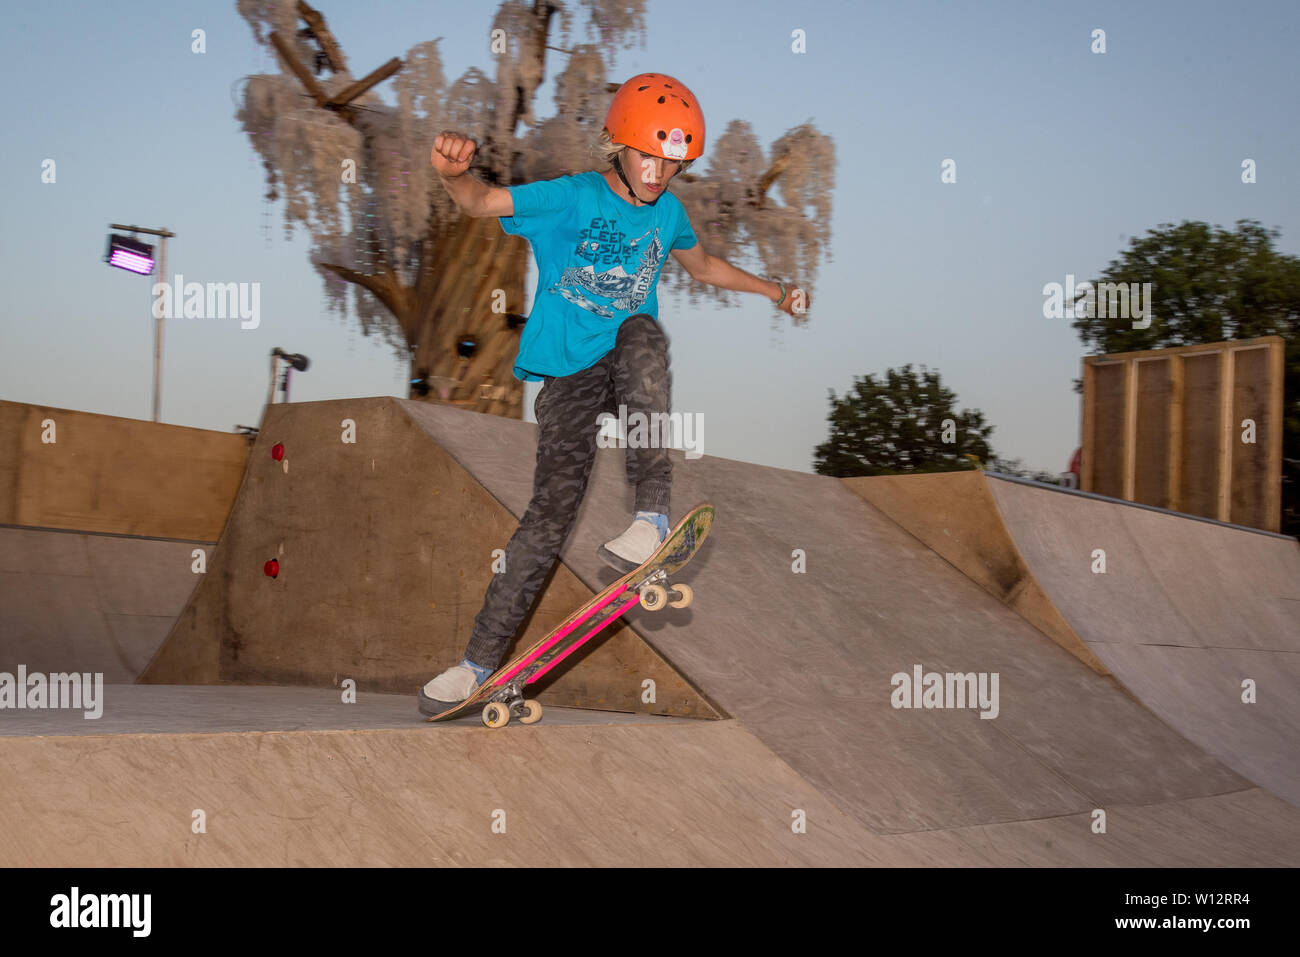 Glastonbury, Pilton, Somerset, UK. 28th June 2019. A young skateboarder at the ramp in Greenpeace Field of Glastonbury Festival on Friday June 2019. Credit: Perspective/Alamy Live News Stock Photo - Alamy